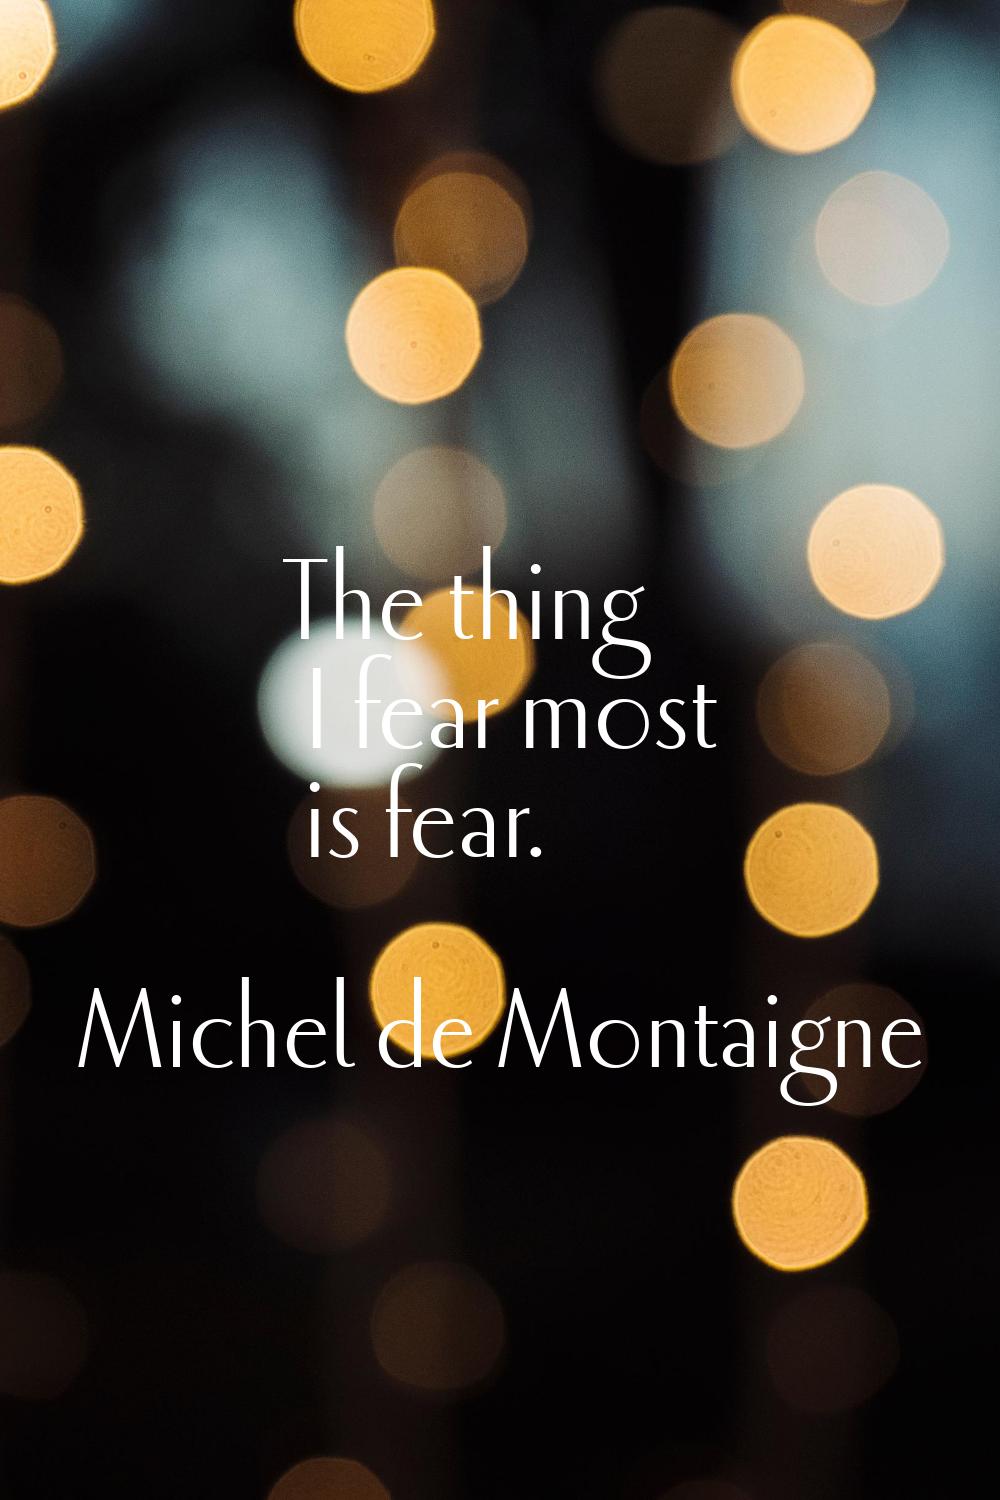 The thing I fear most is fear.